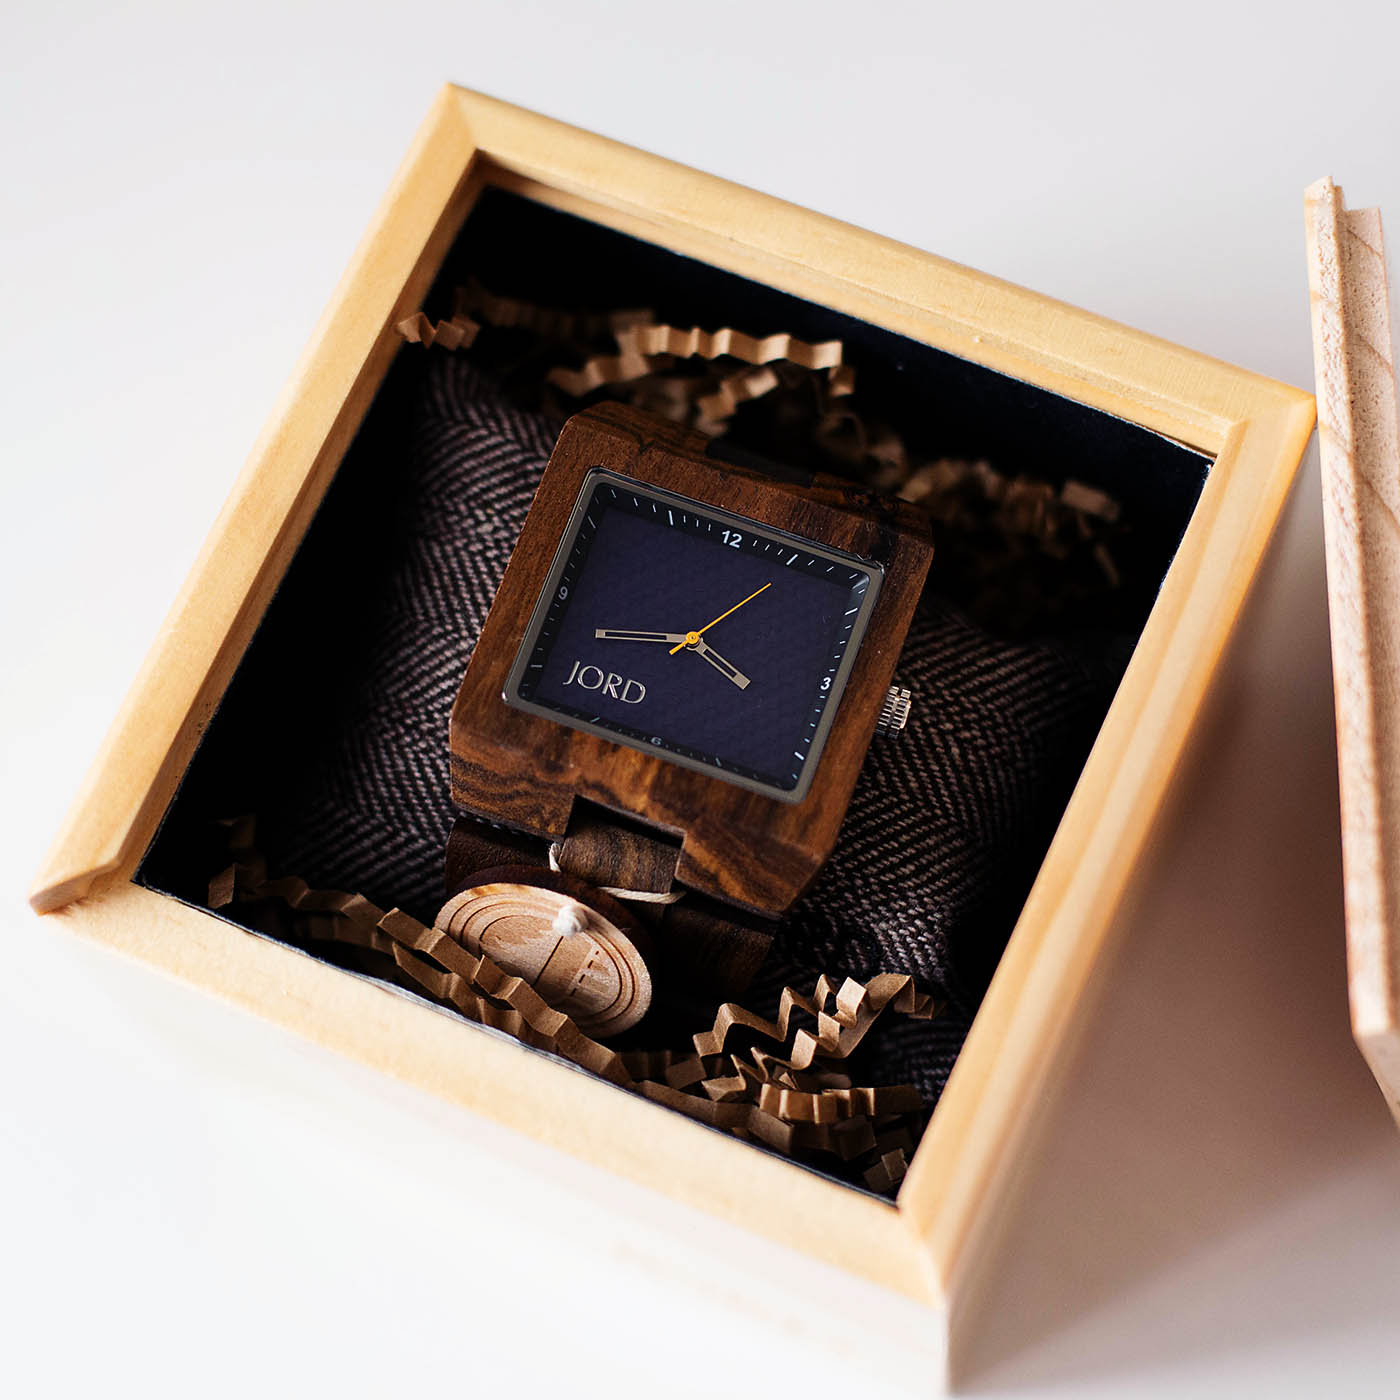 JORD wooden watches - truly gorgeous and a great gift idea for anyone!